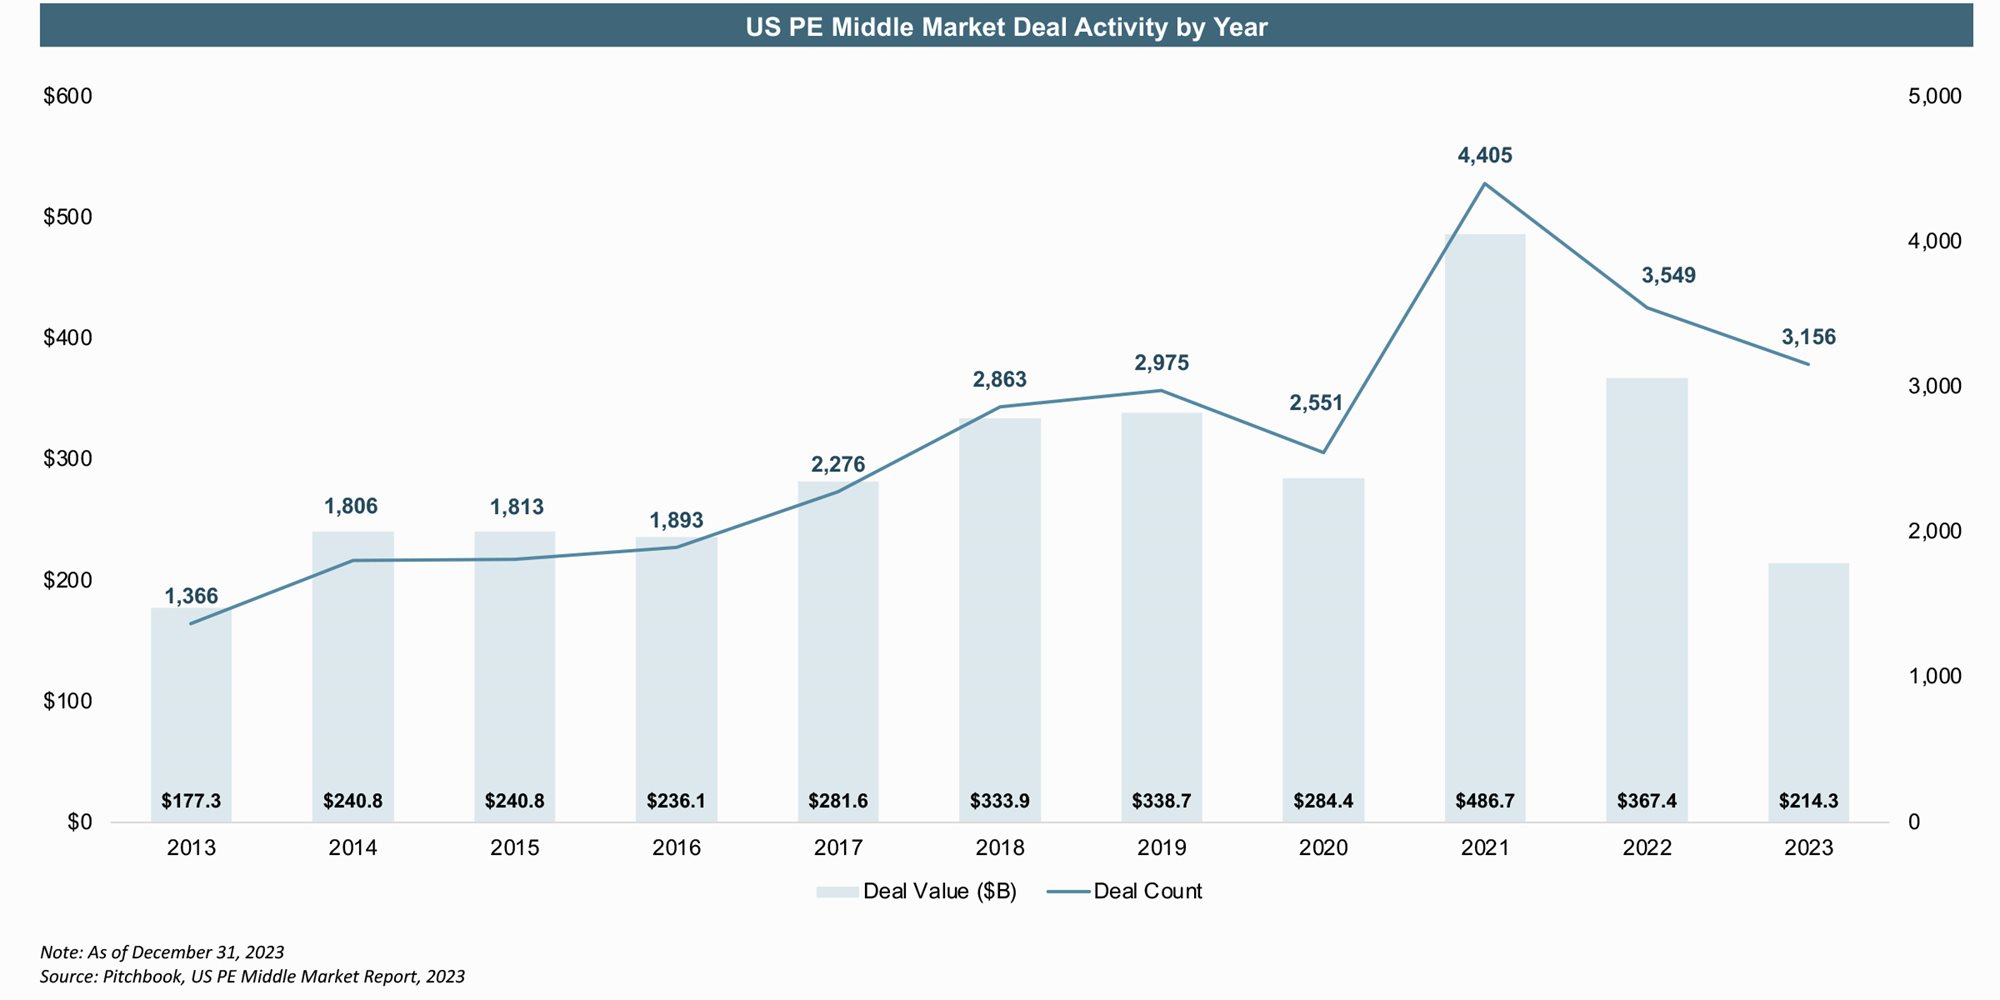 US PE Middle Market Deal Activity by Year